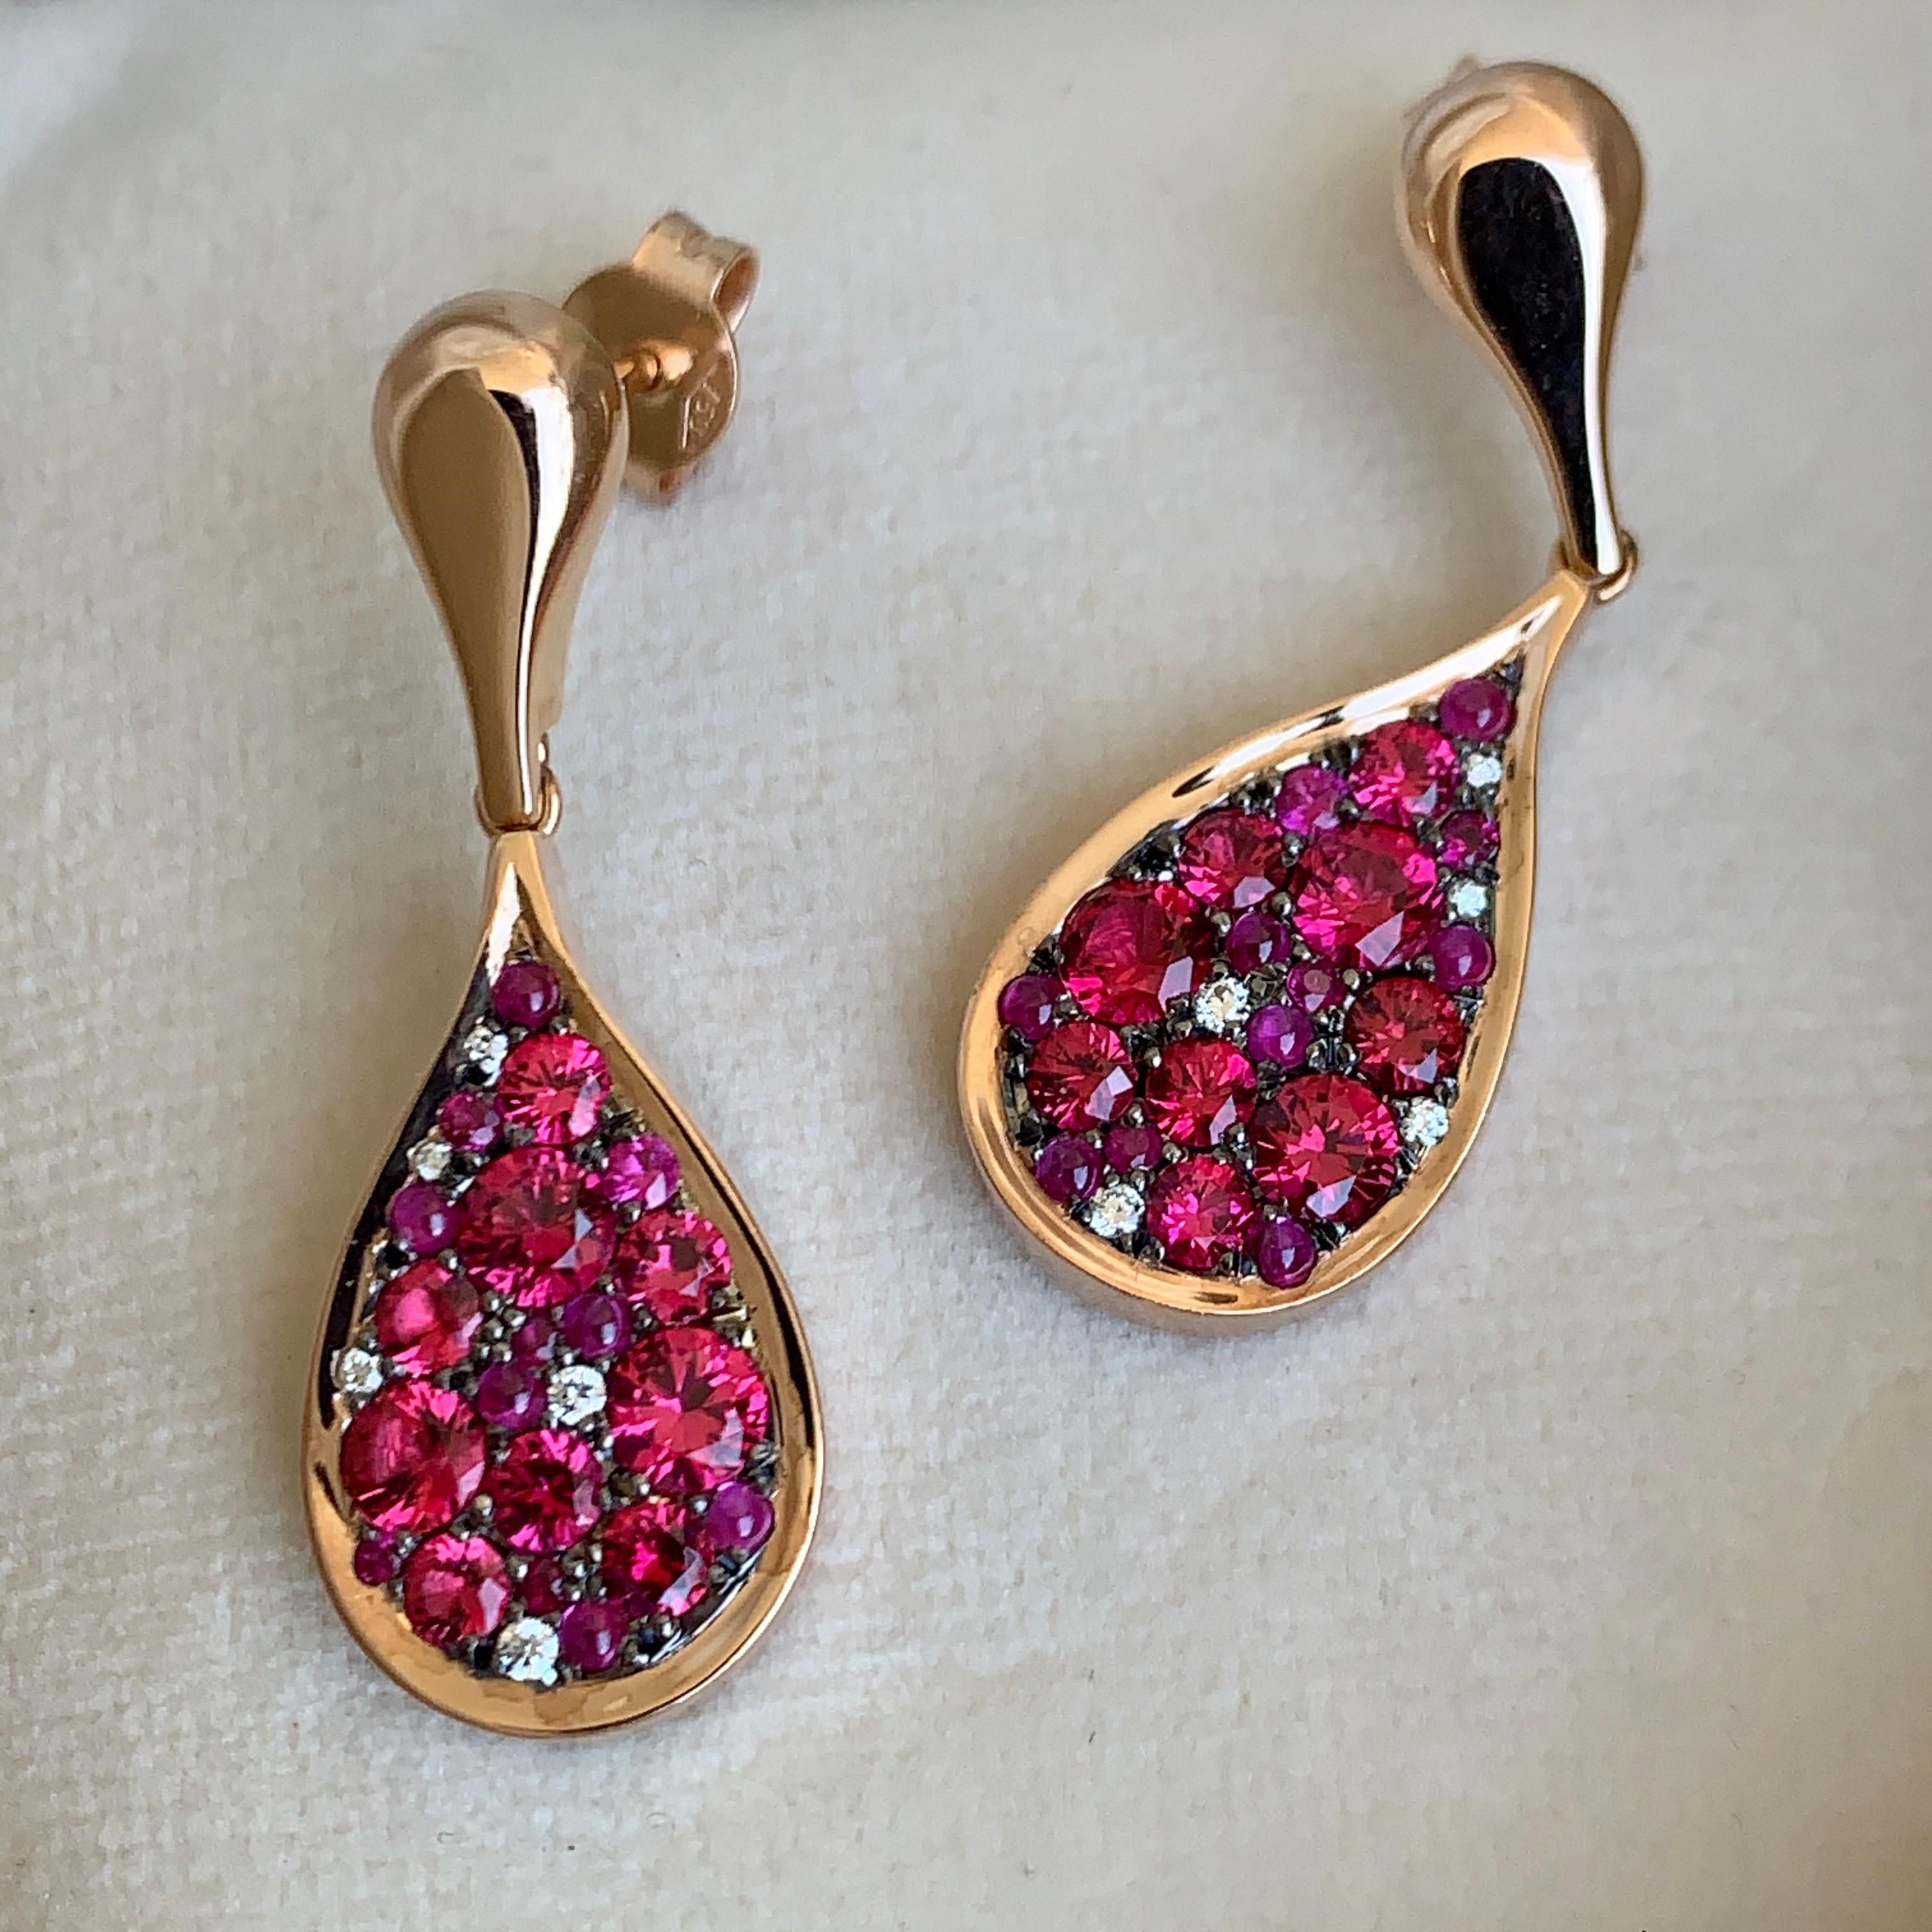 One of a kind earrings handmade in Belgium by jewelry artist Joke Quick in 18K rose gold 6,9 g & blackened sterling silver 3.3 g (The stones are set on silver to create a black background for the stones) Pave set with unheated Burmese intense Red (